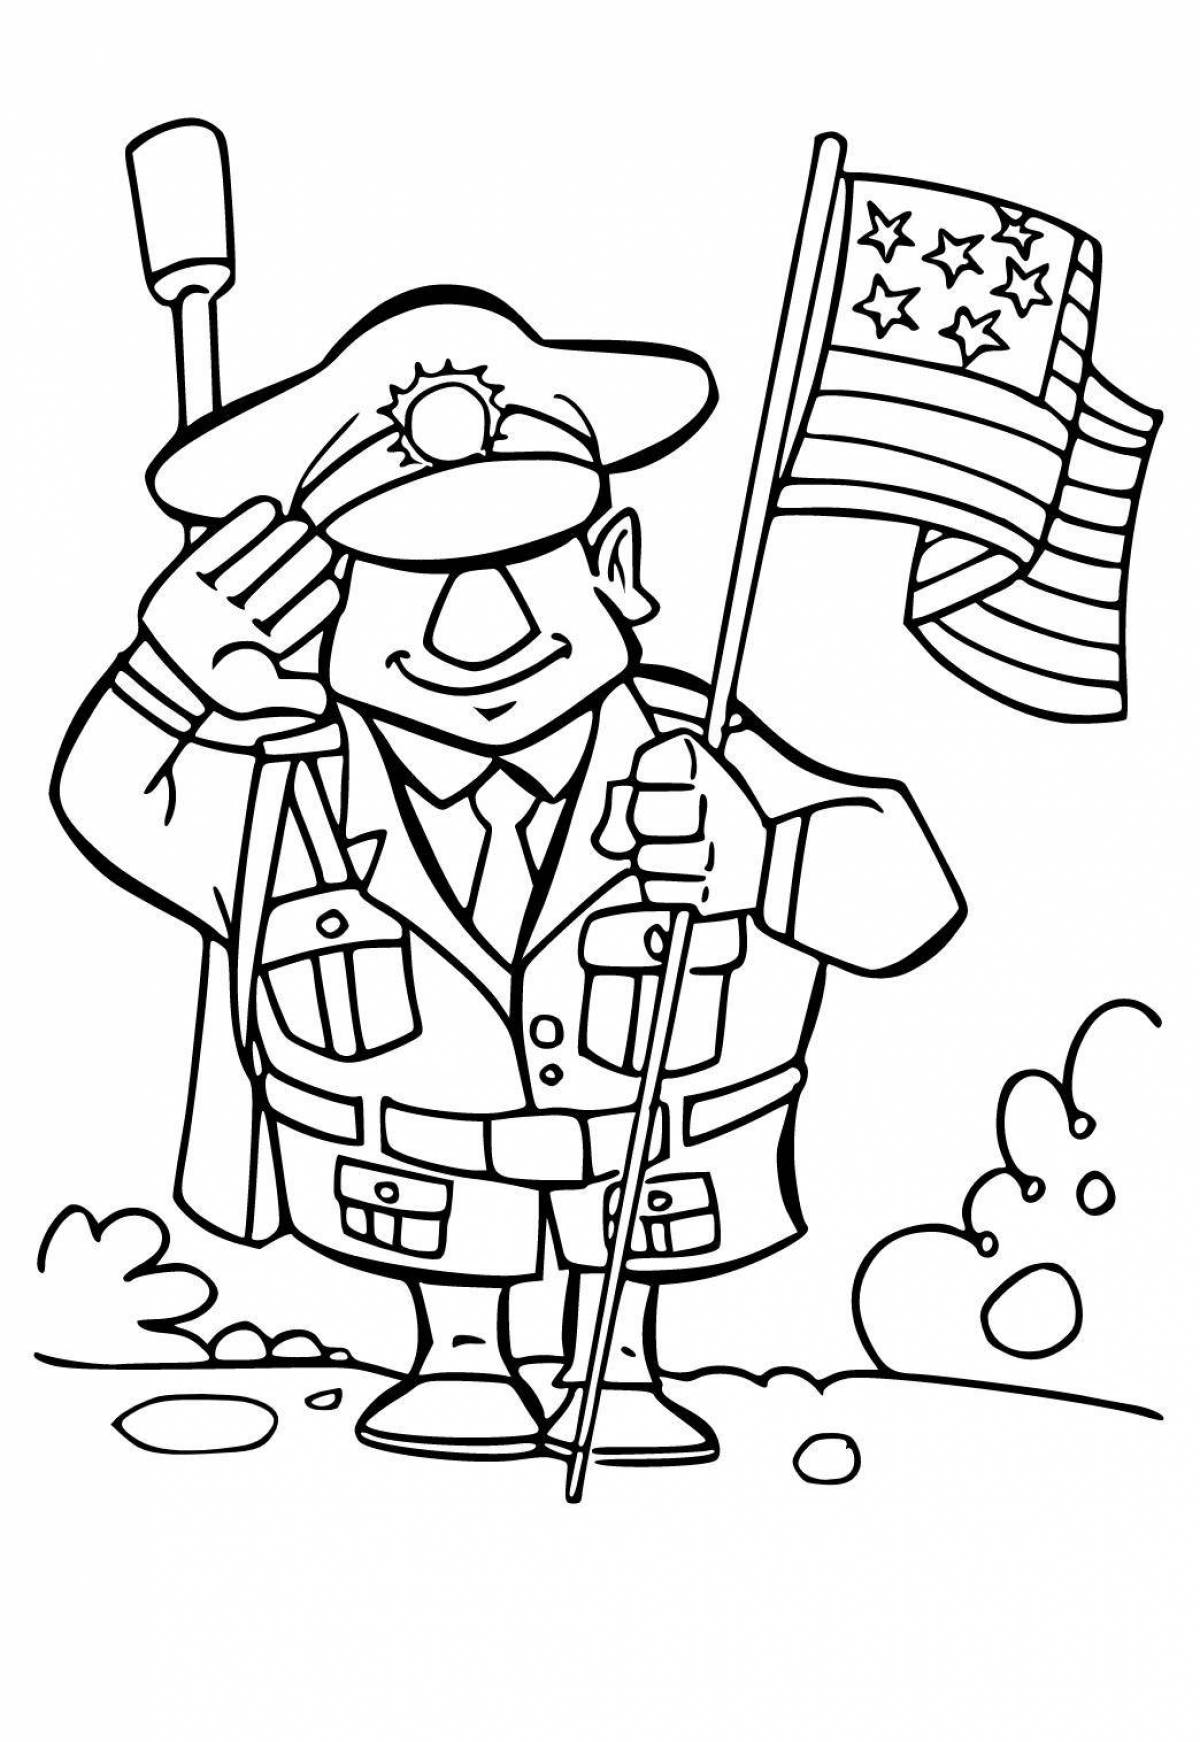 Courageous soldier and child coloring page